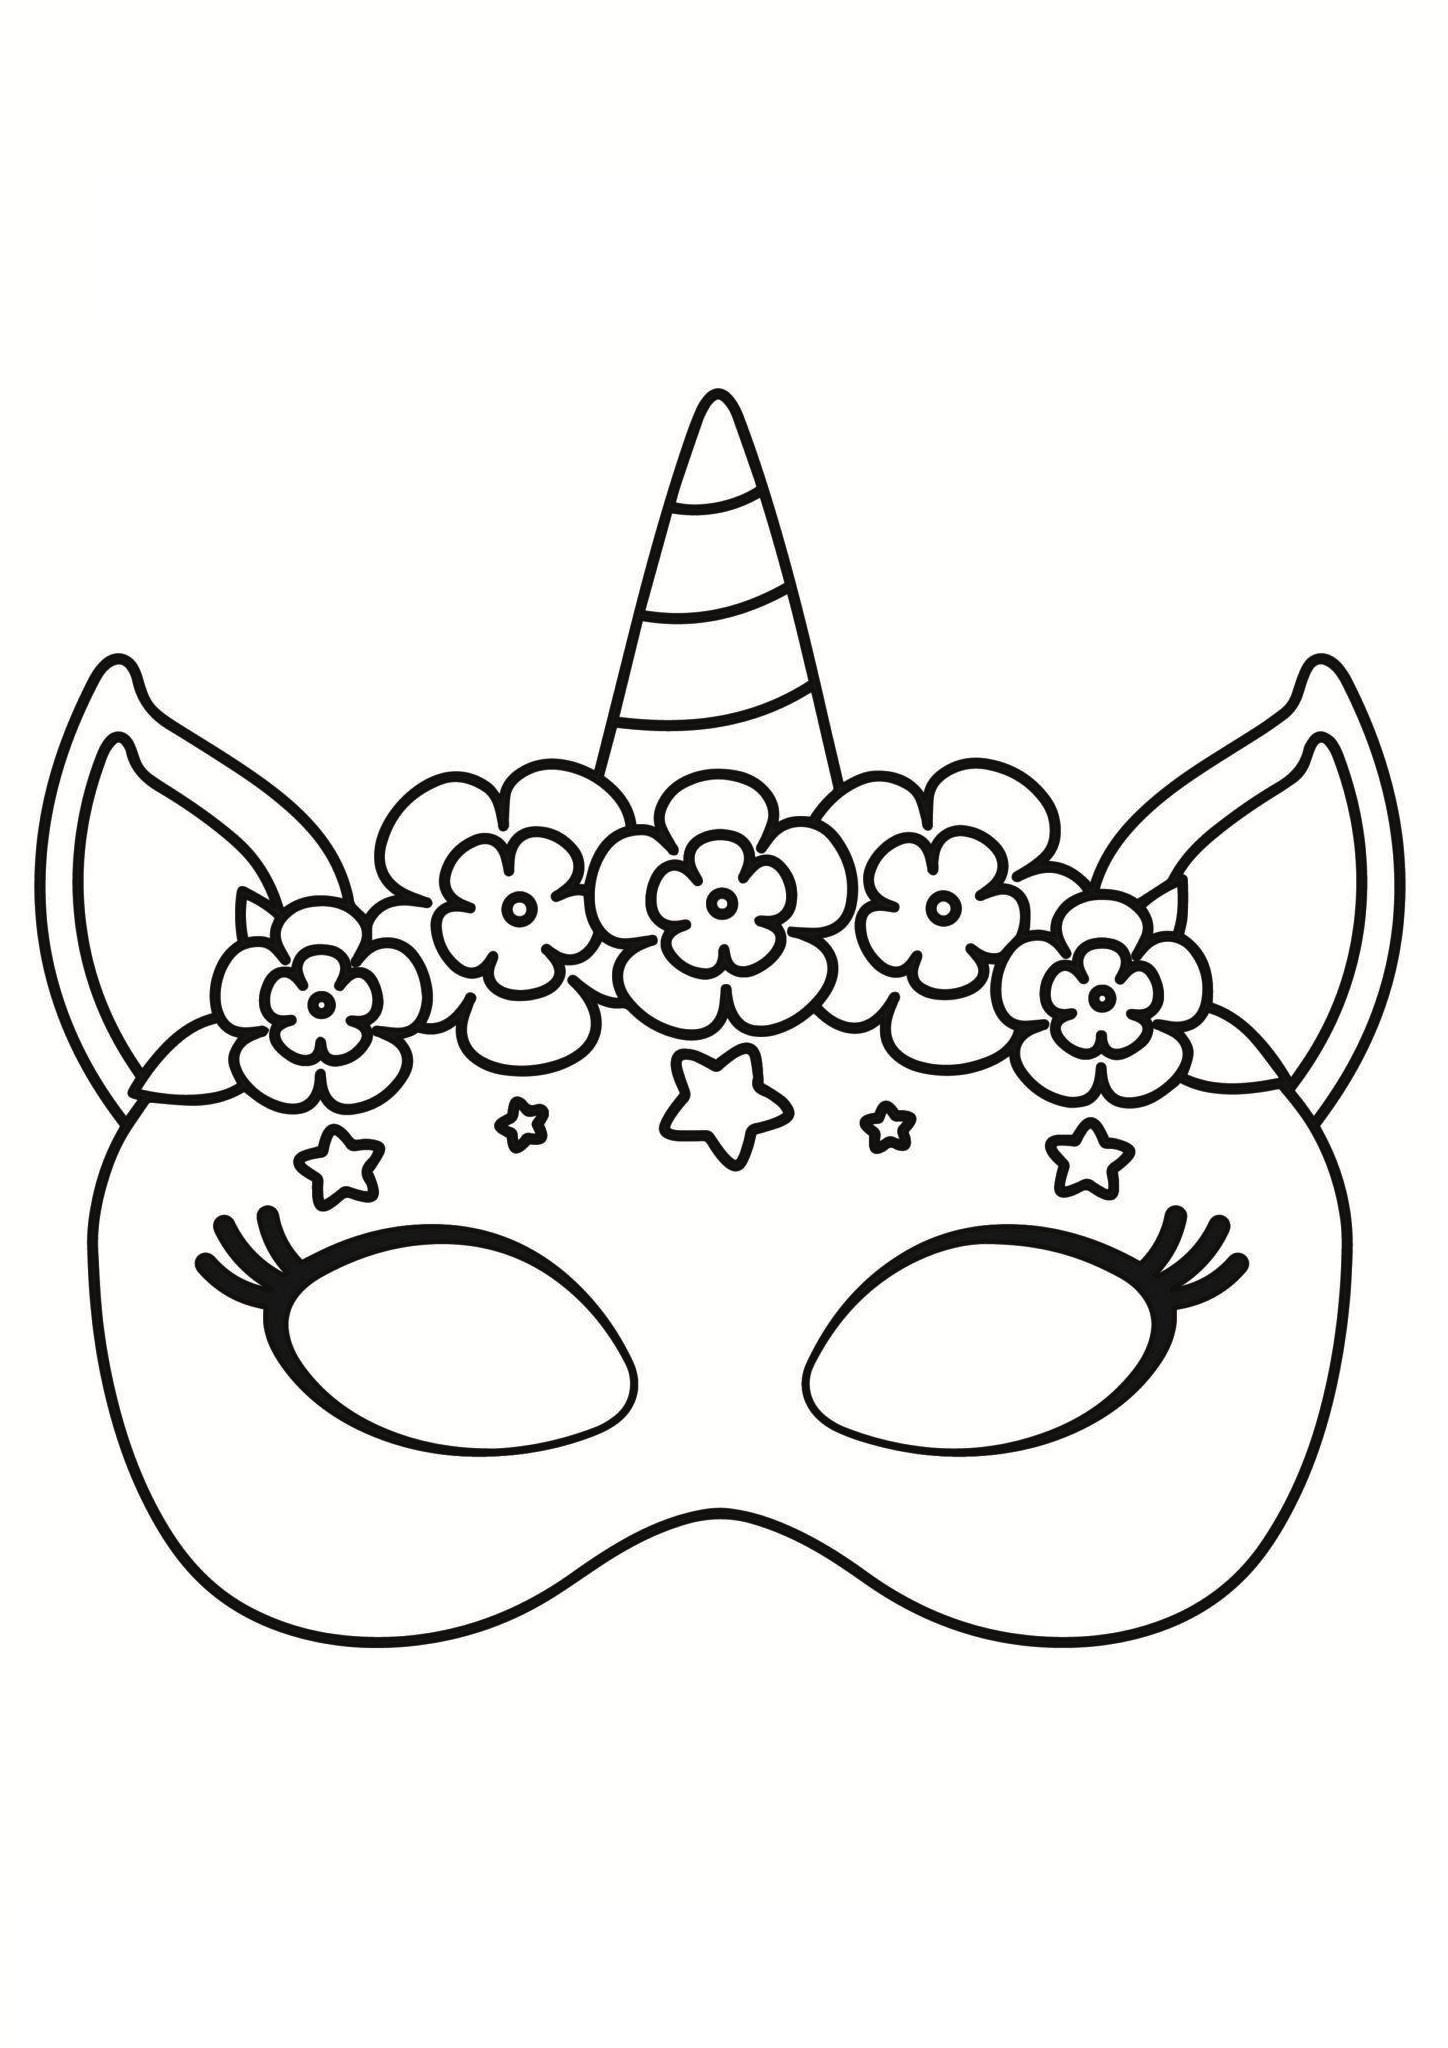 Unicorn Mask Coloring Book Printable & Online